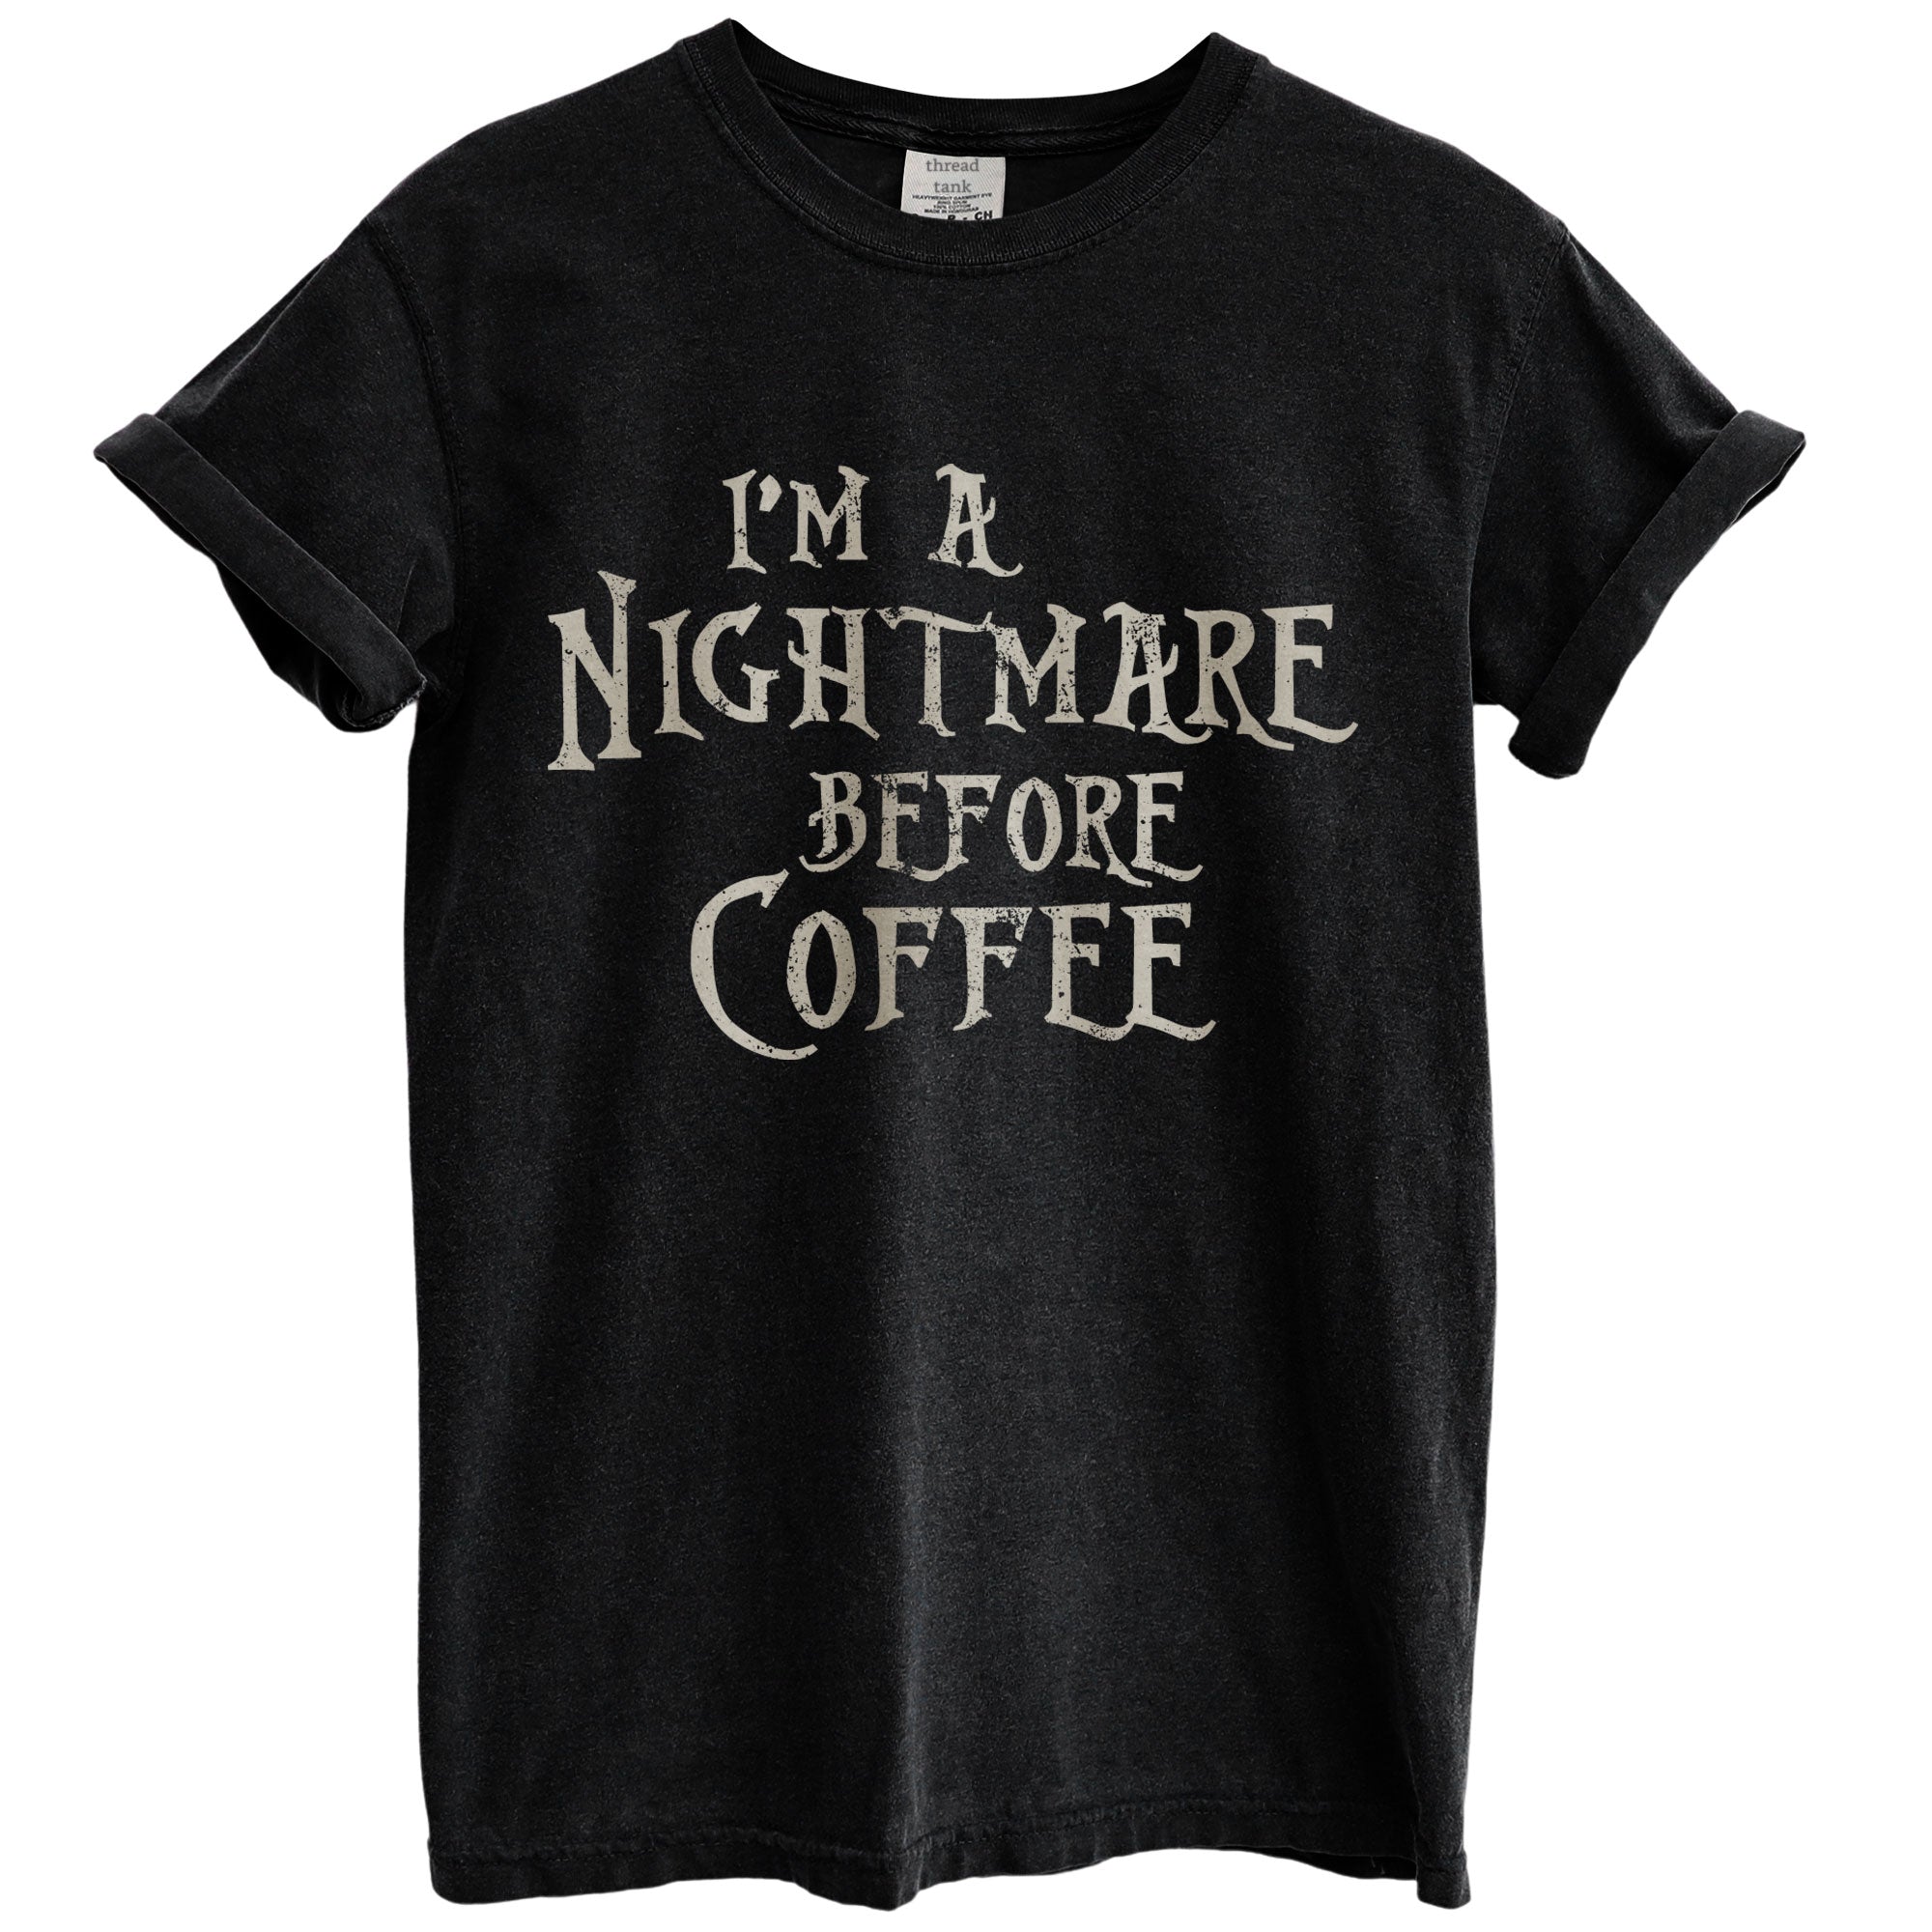 im a nightmare before coffee oversized garment dyed shirt